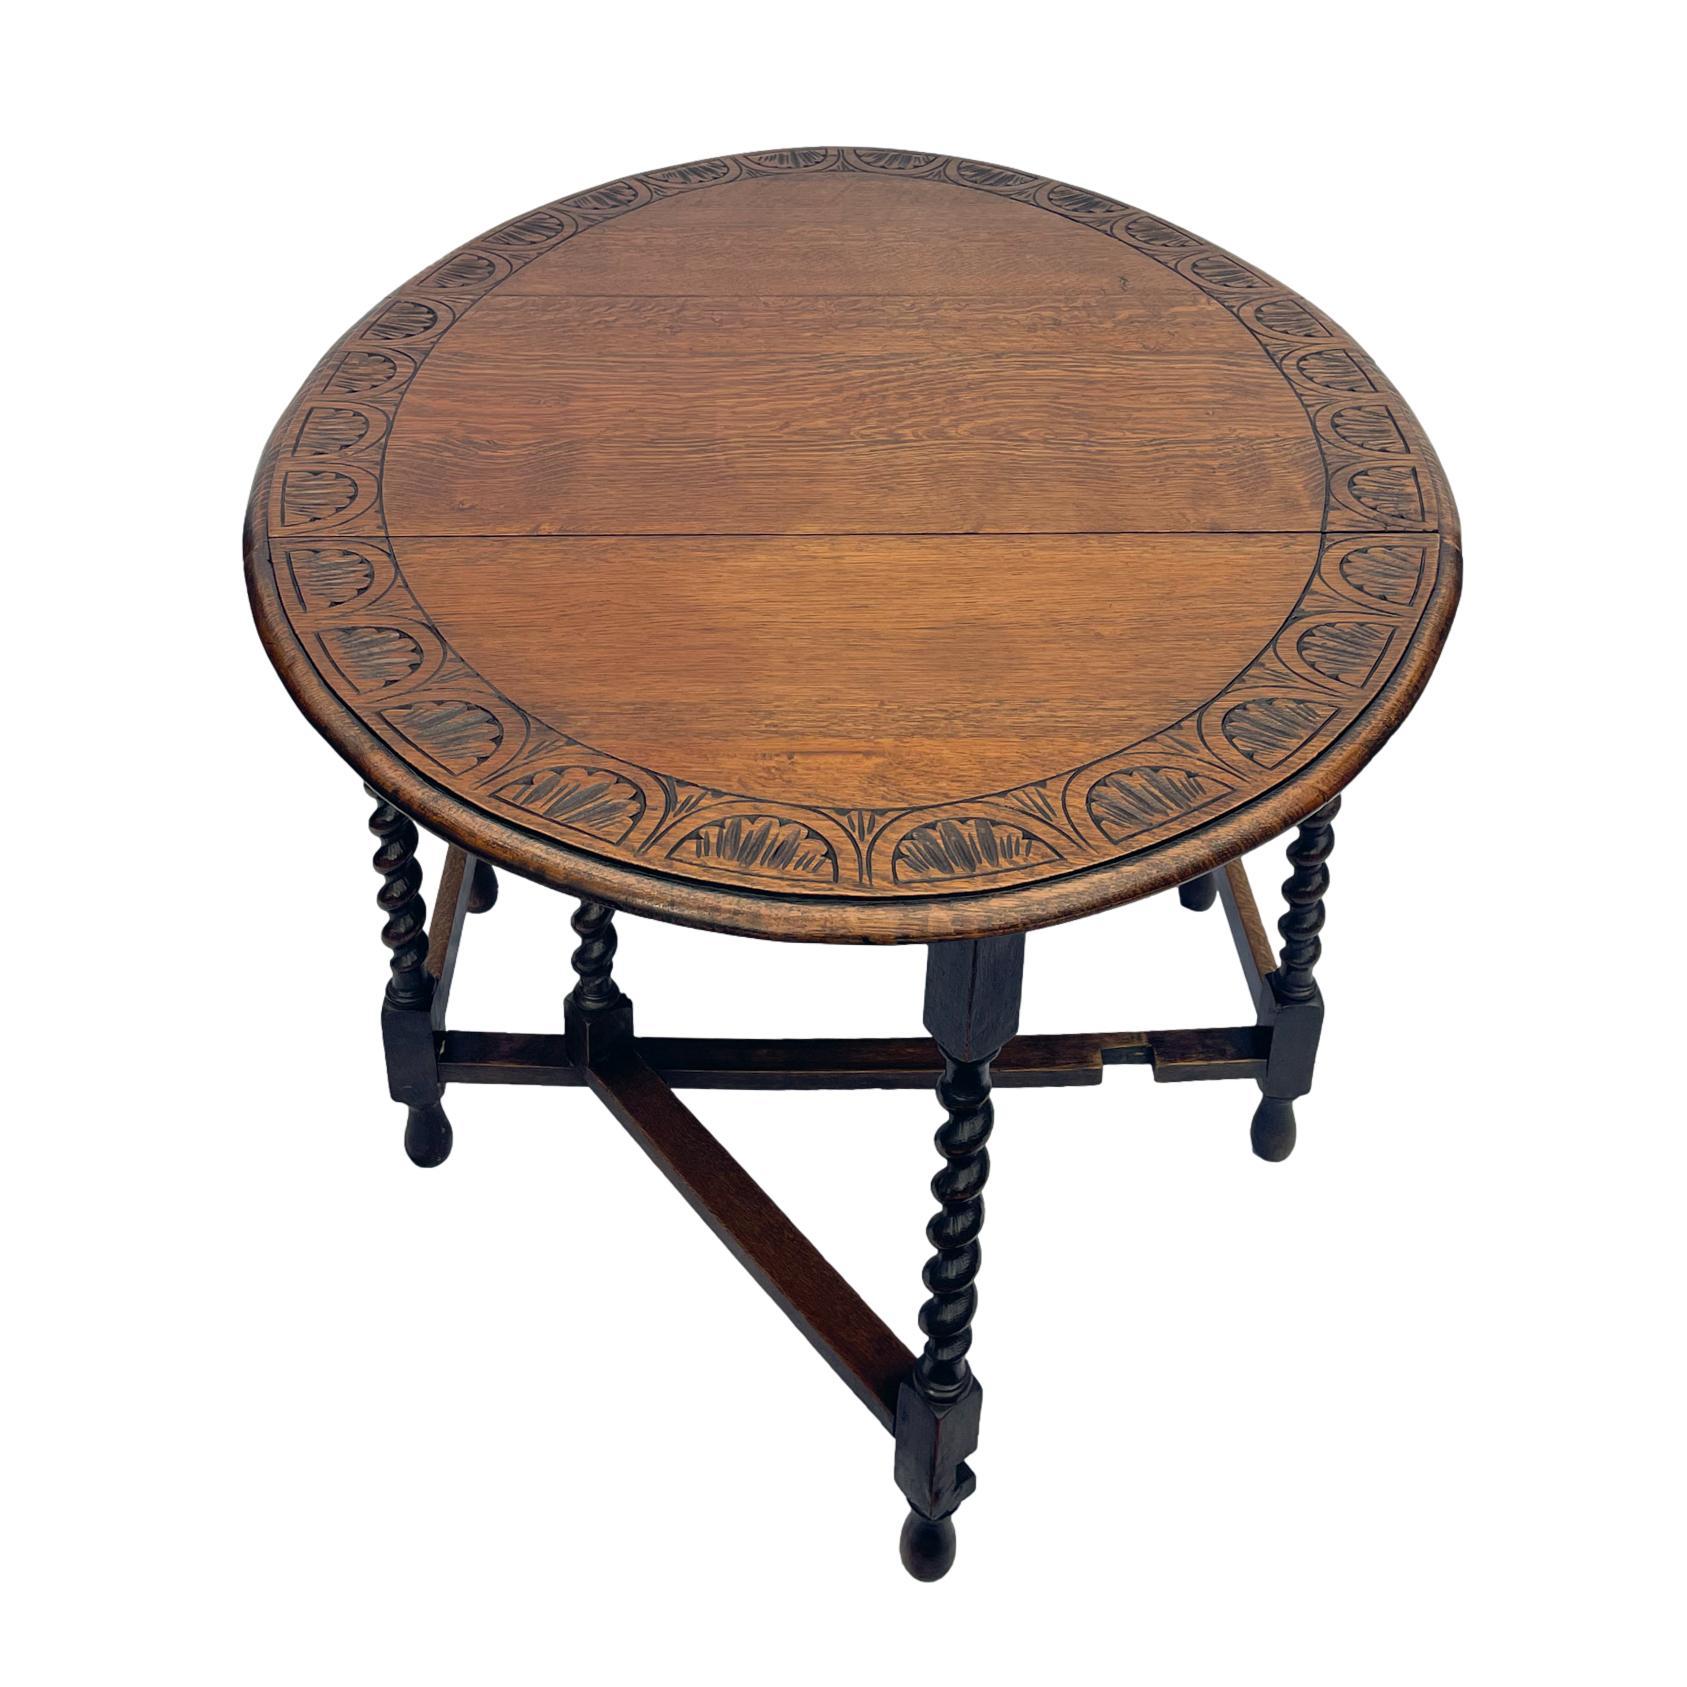 Jacobean Oak Barley Twist Drop-Leaf Table with a Carved Top, English, circa 1920 For Sale